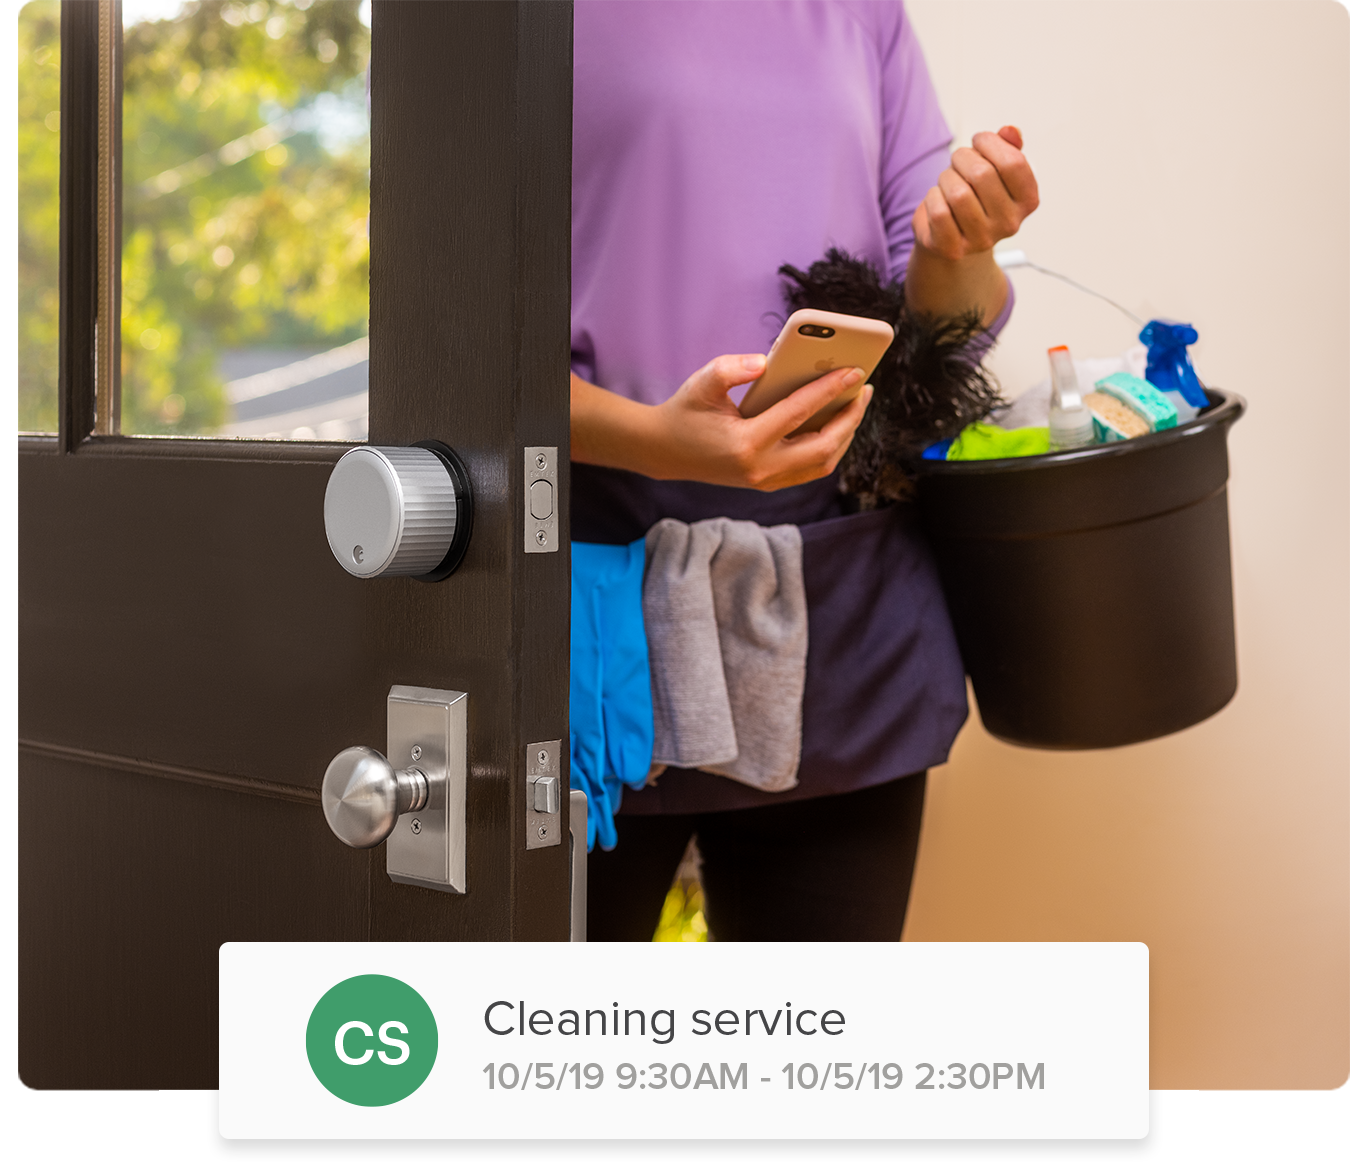 Cleaning service entering the house with using the August app